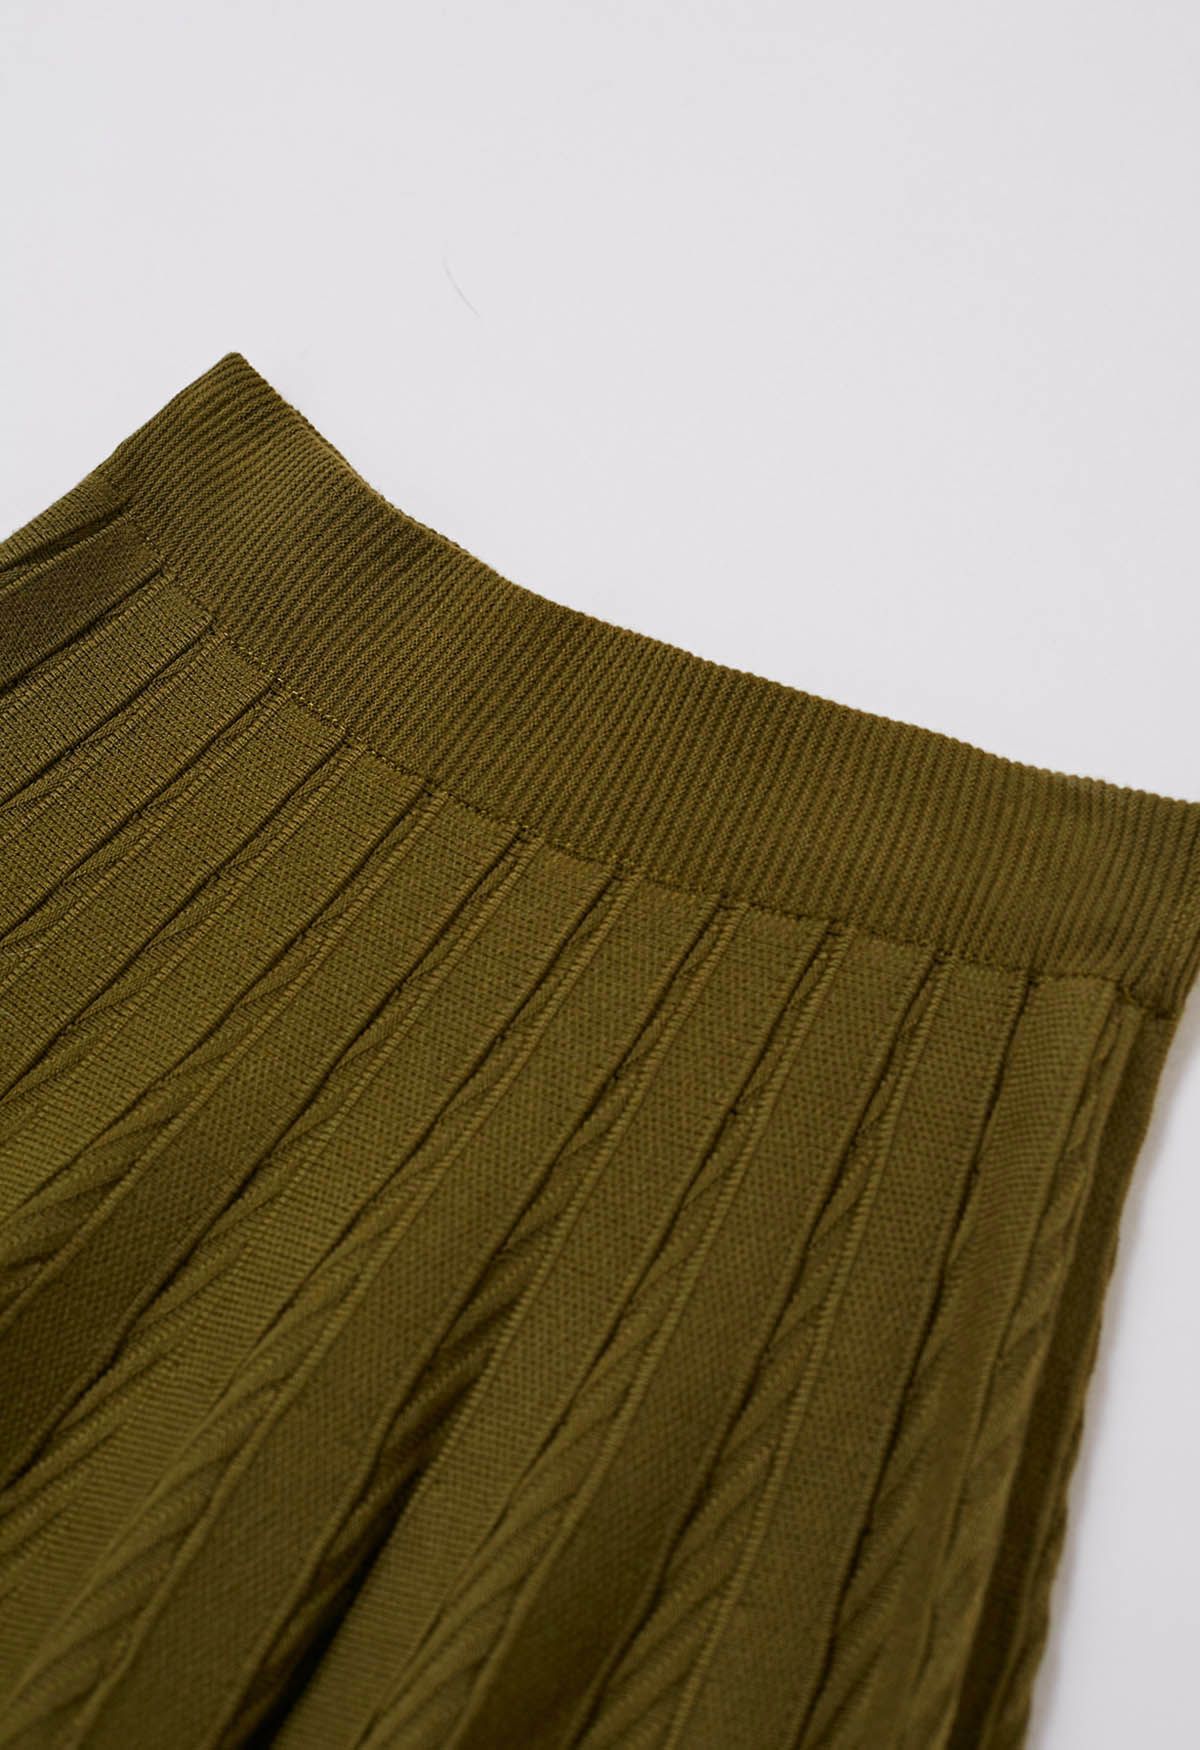 Diagonal Ribbed Pleated Knit Skirt in Army Green